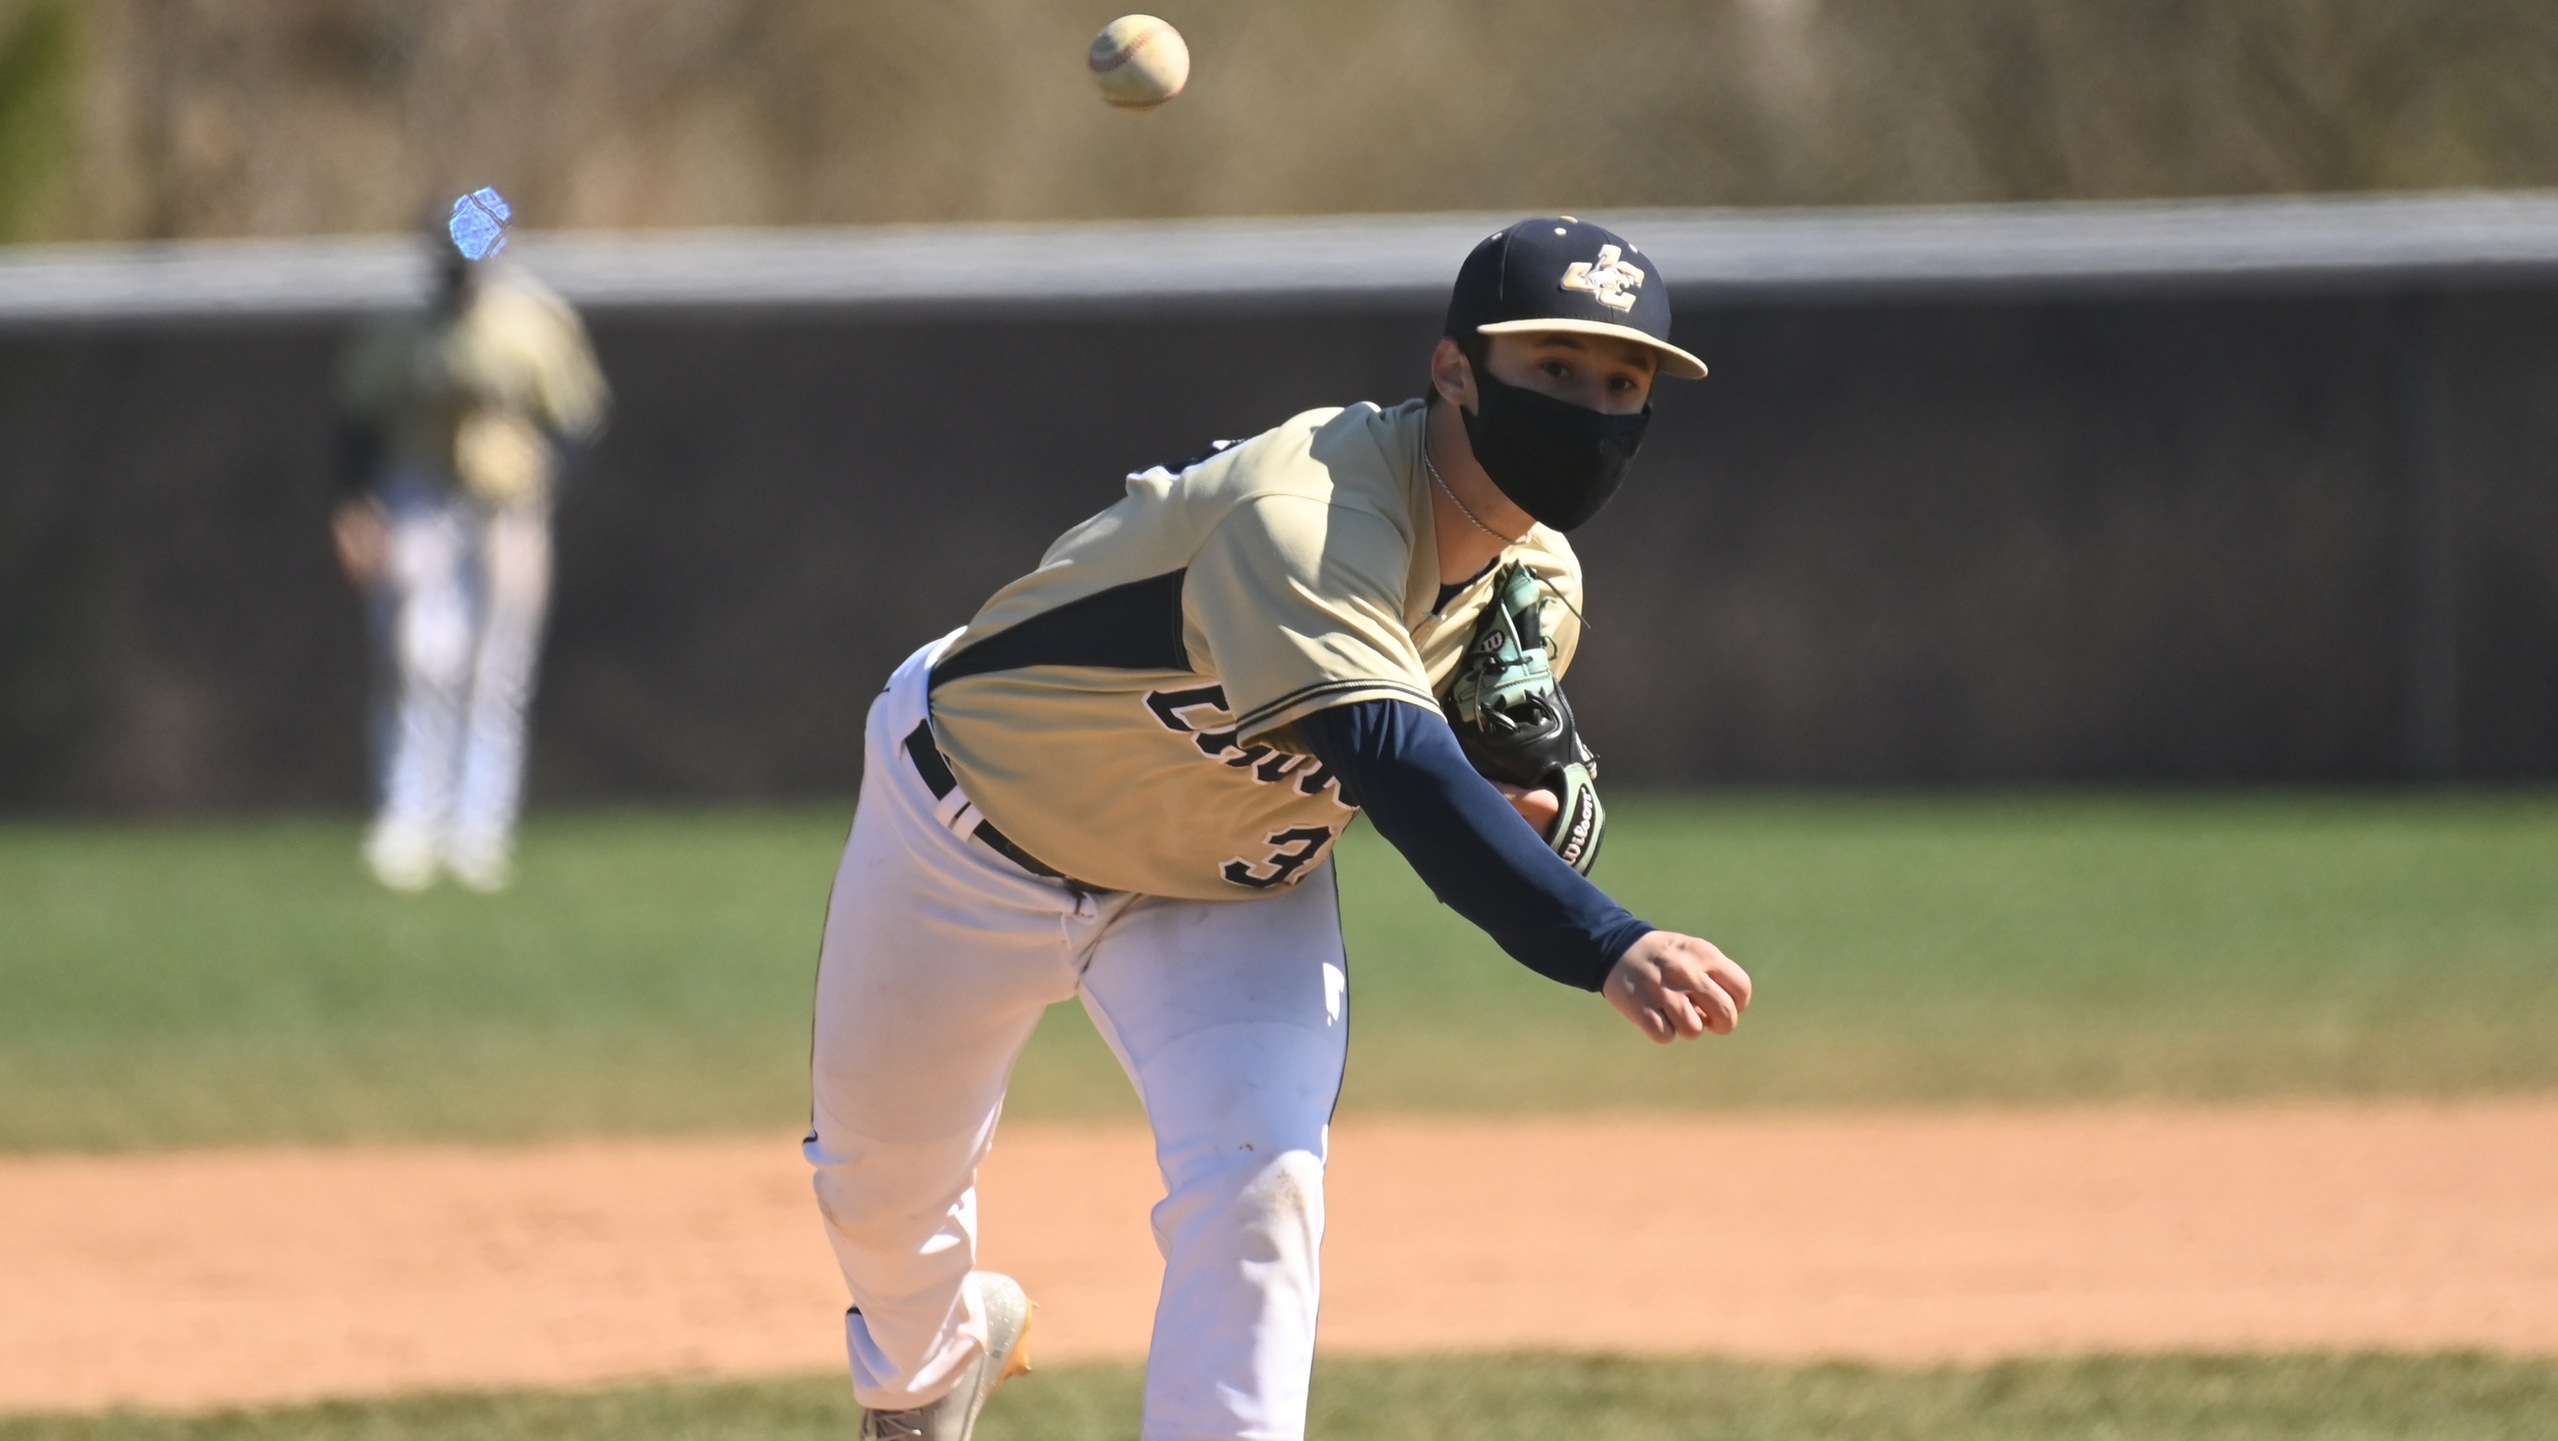 Alessandroni's Complete Game Leads Eagles to Split at Moravian